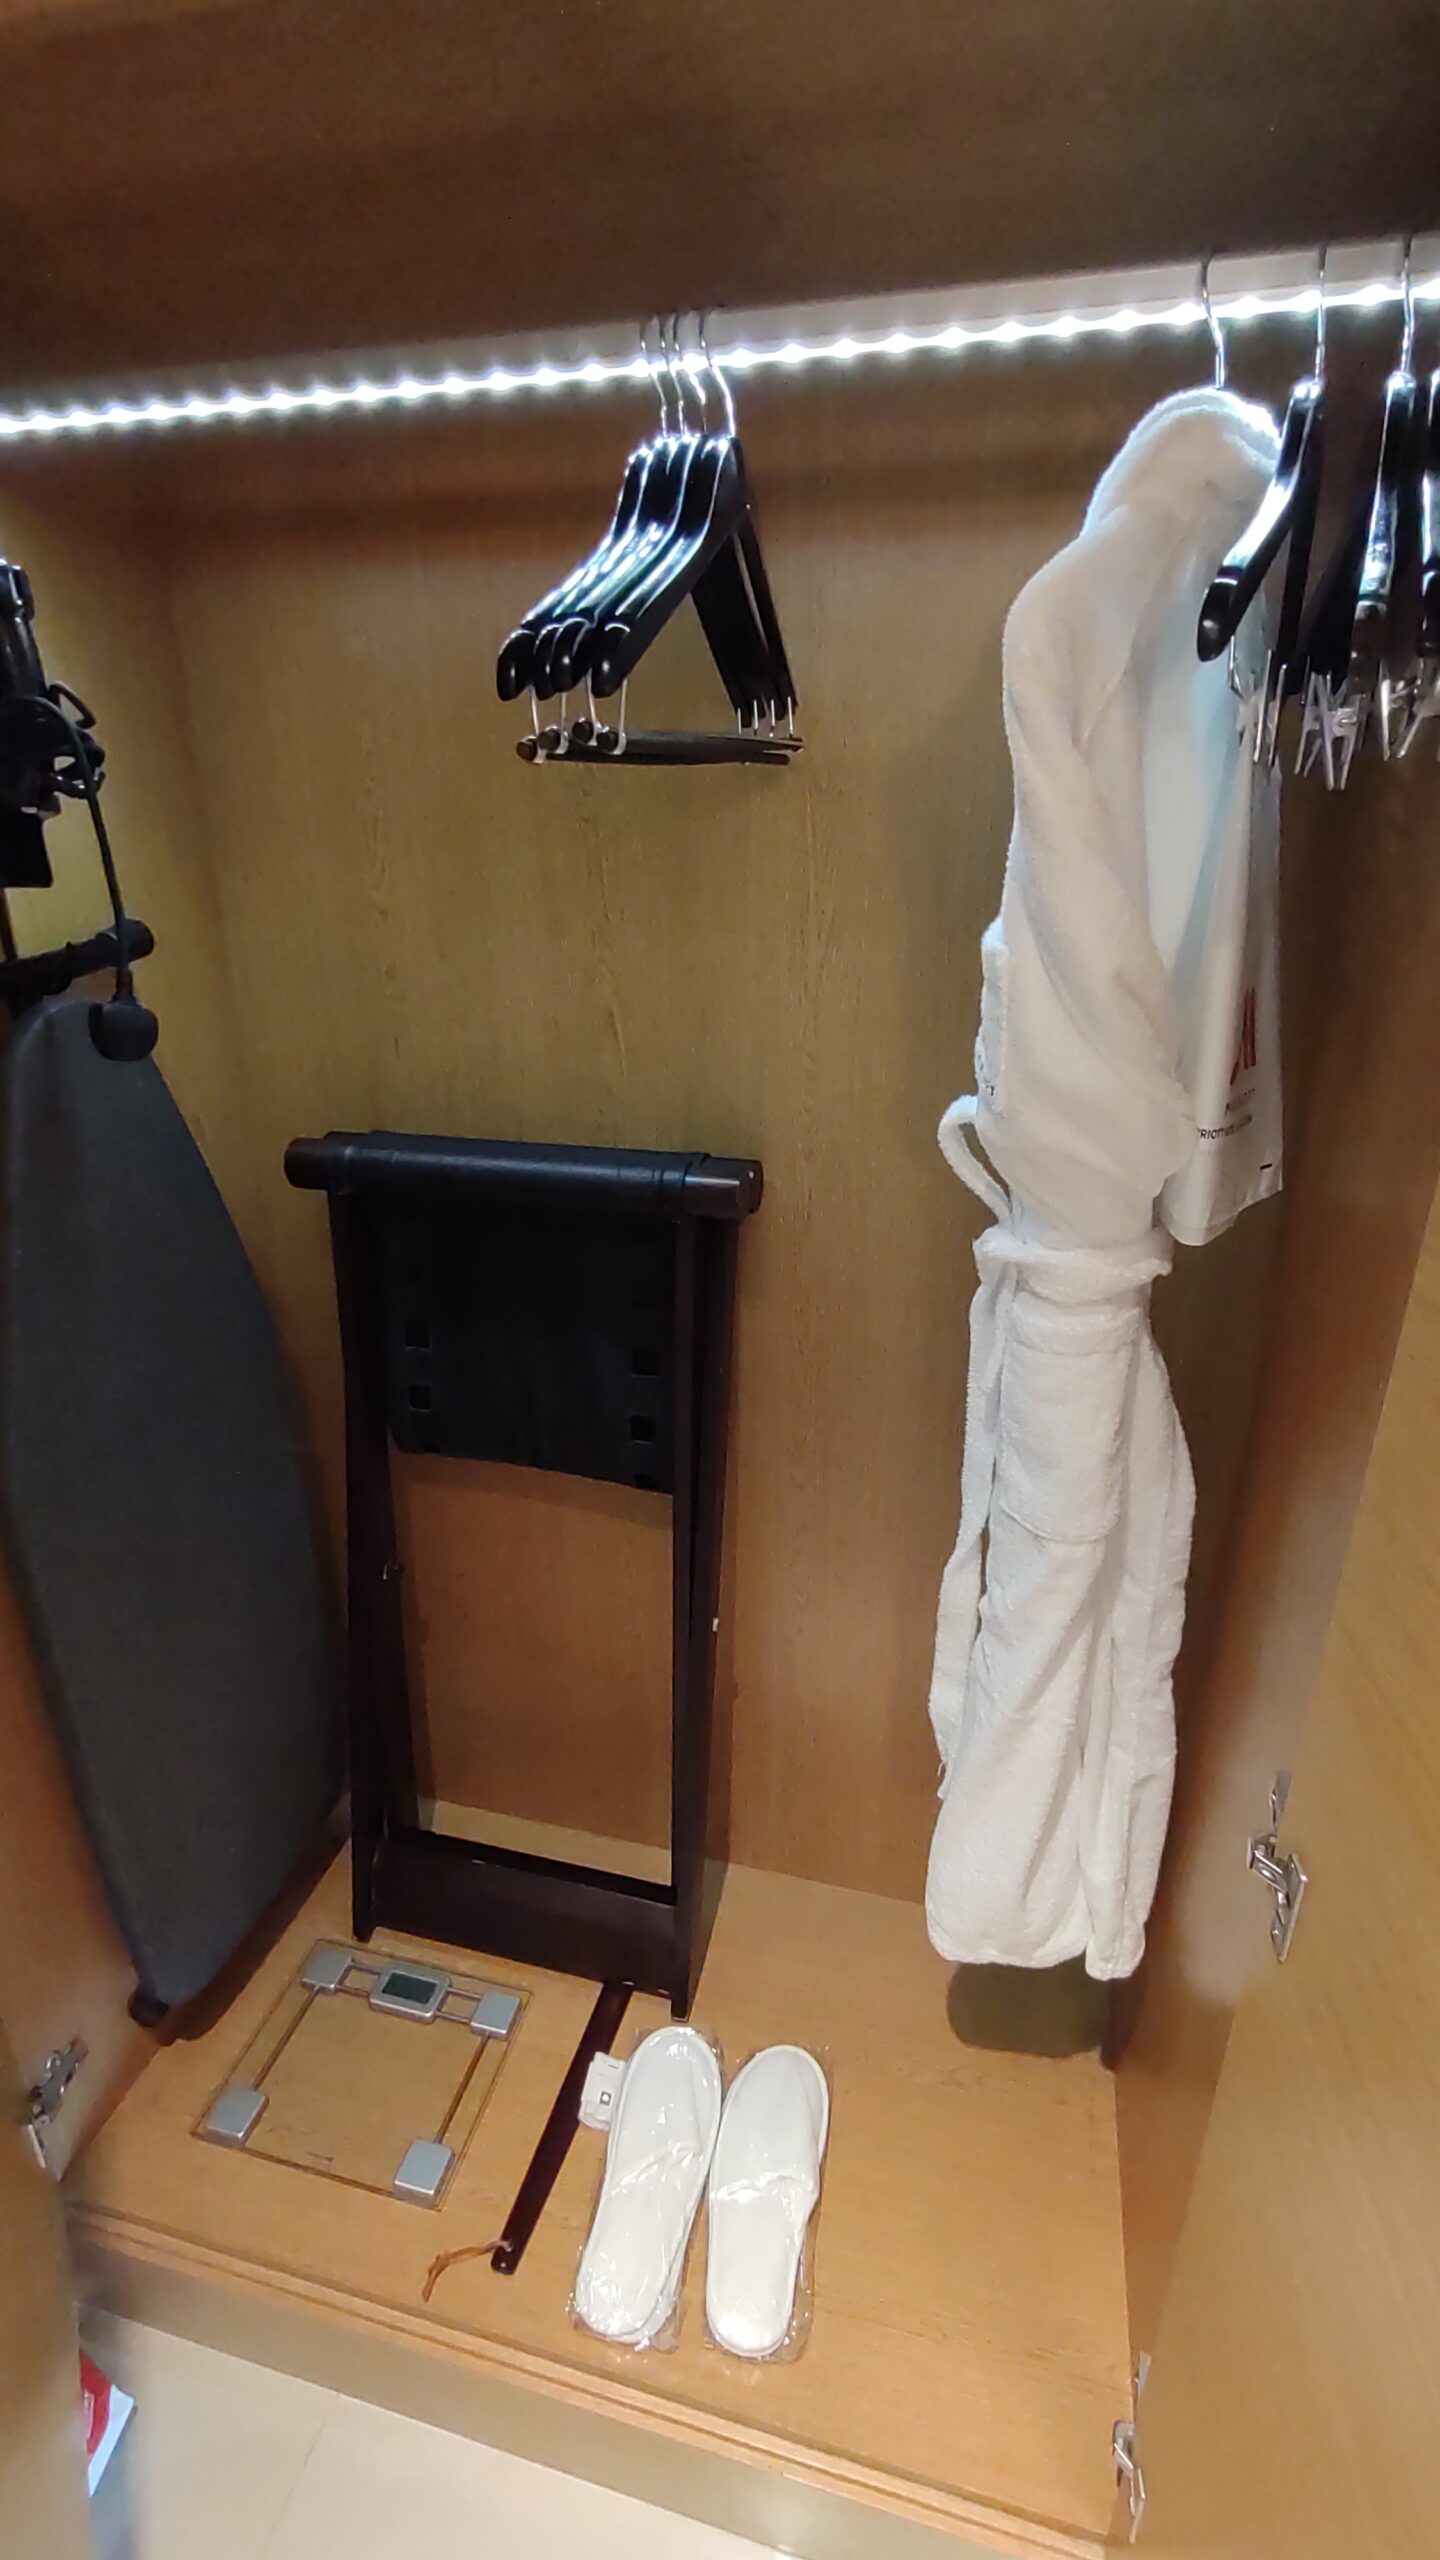 PICTURE OF THE CLOSET IN THE SUITE WITH ALL THE AMENITIES SUCH AS ROBE AND SHOE HORN .